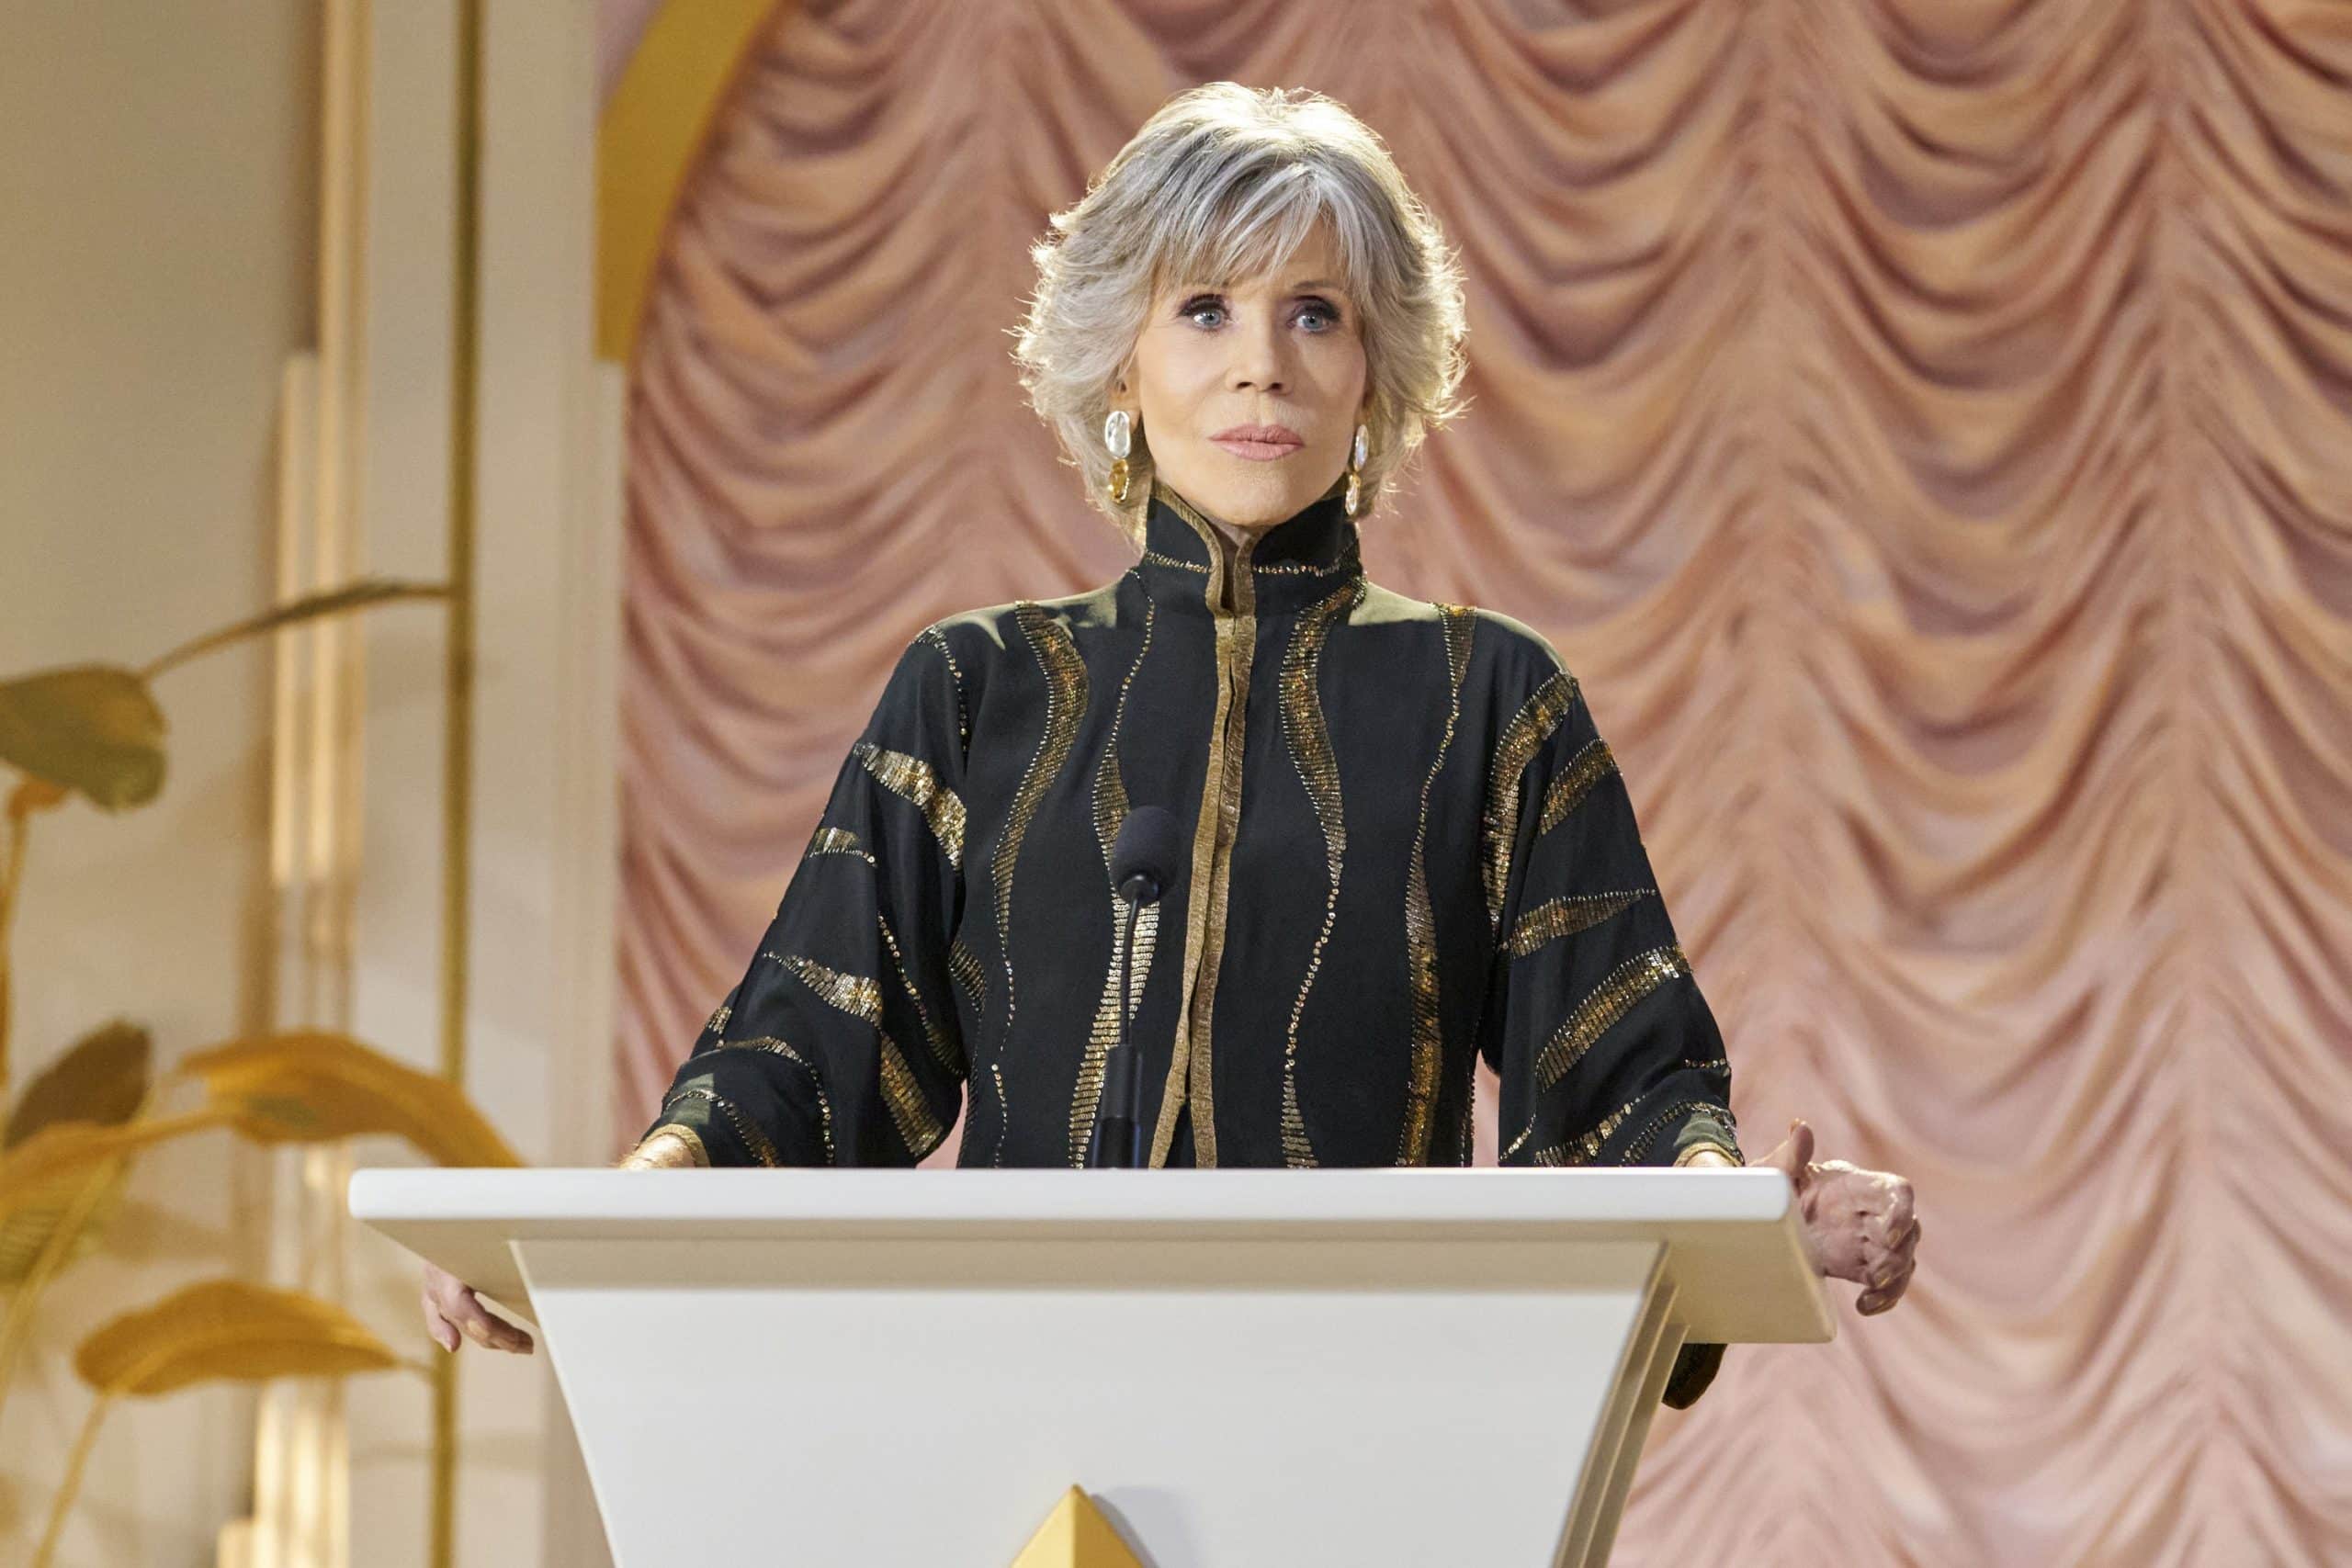 YEARLY DEPARTED, Jane Fonda, (aired on Dec. 23, 2021)